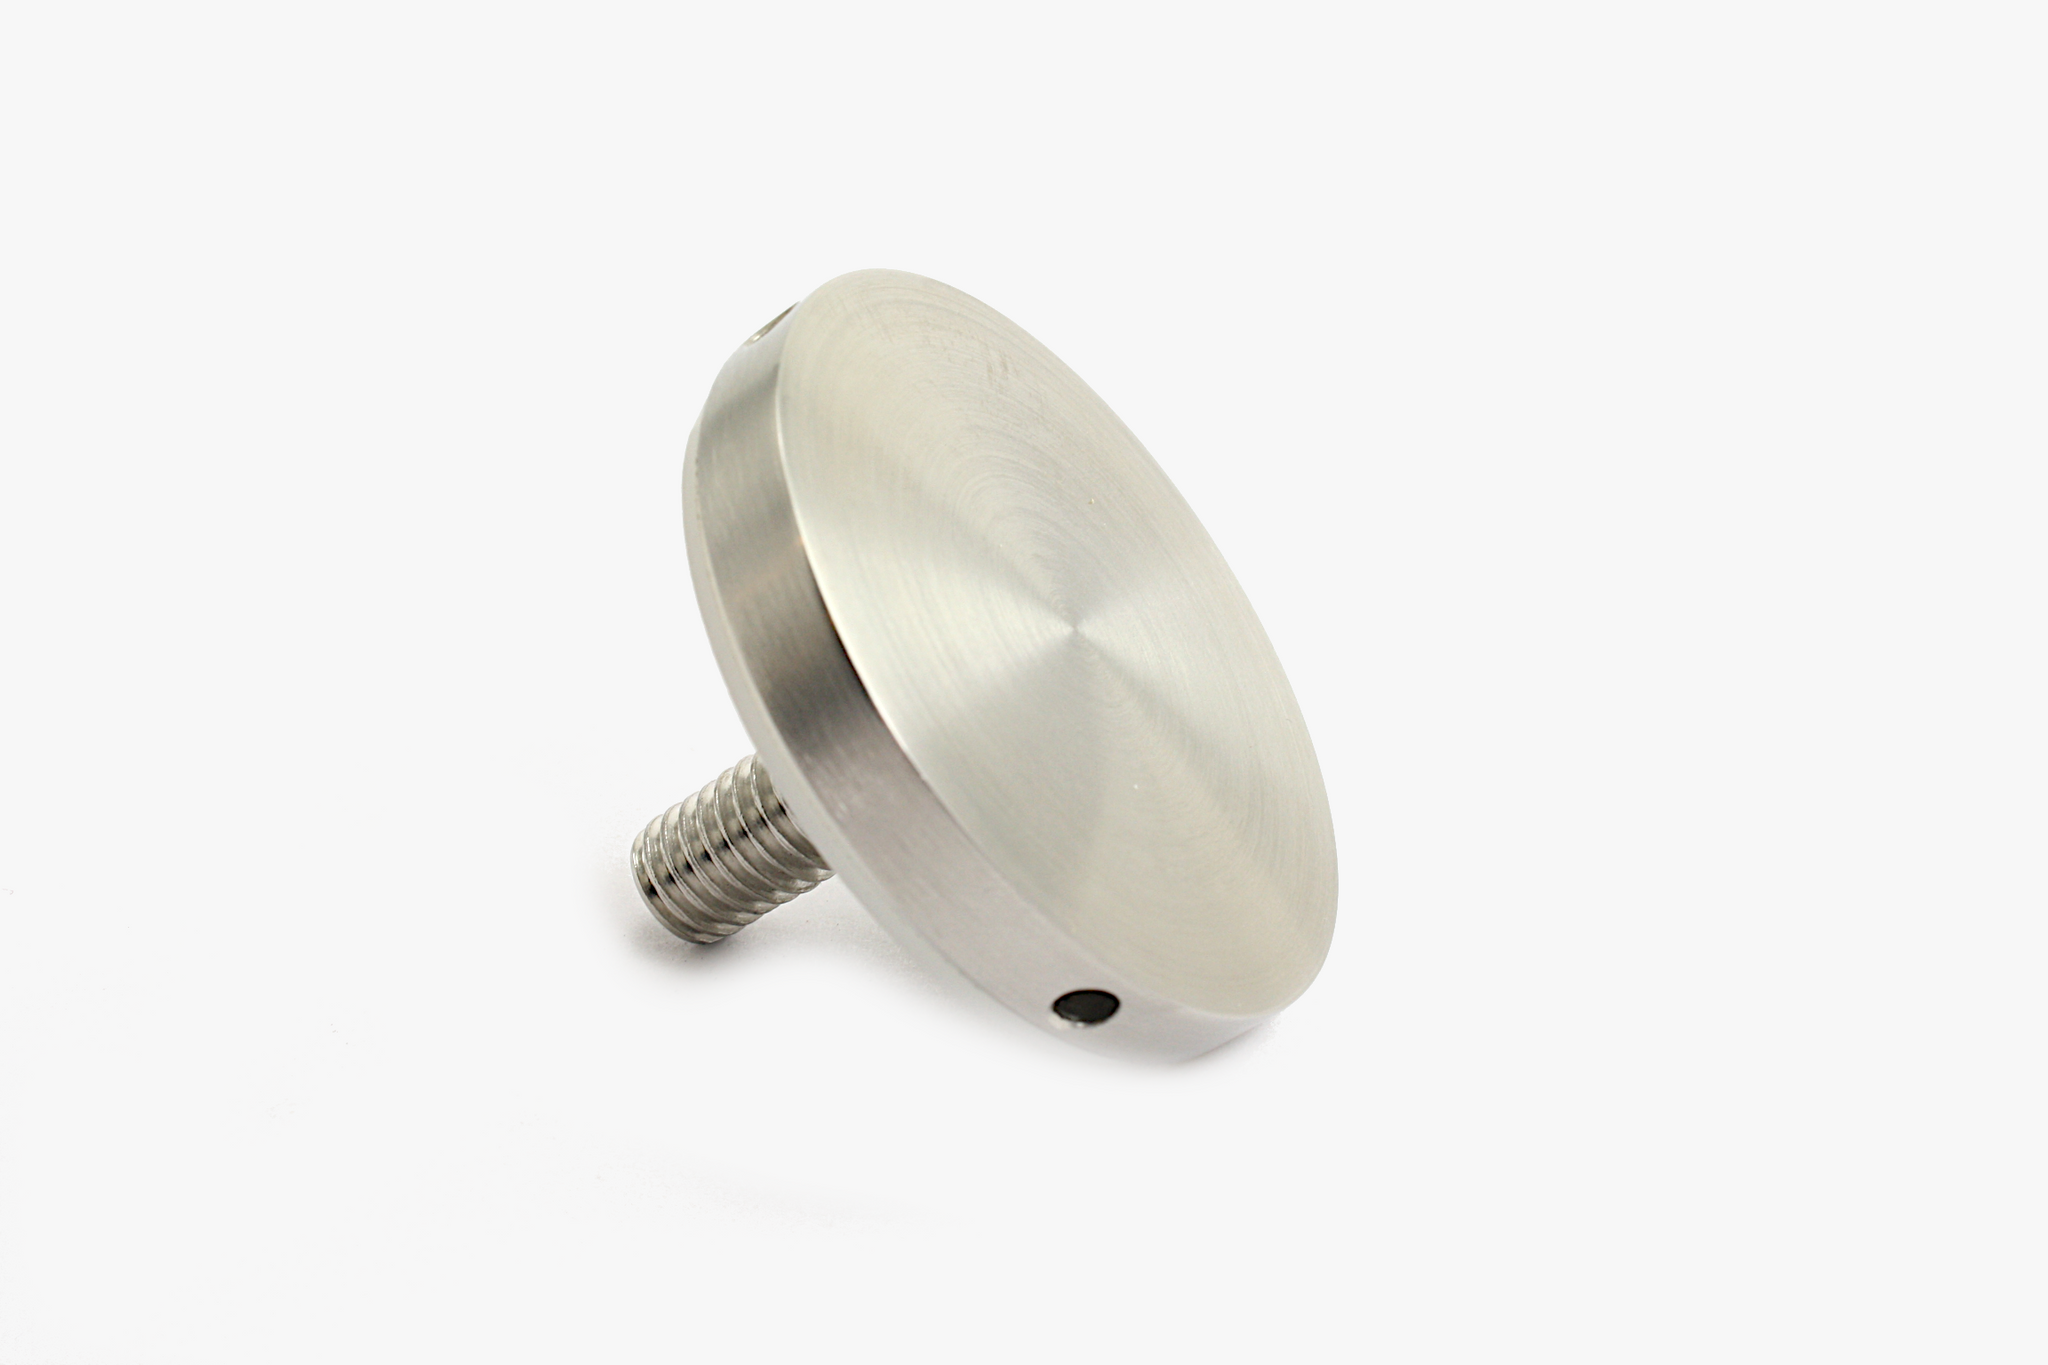 2" diameter flat stand off cap (plain) - Brushed stainless steel